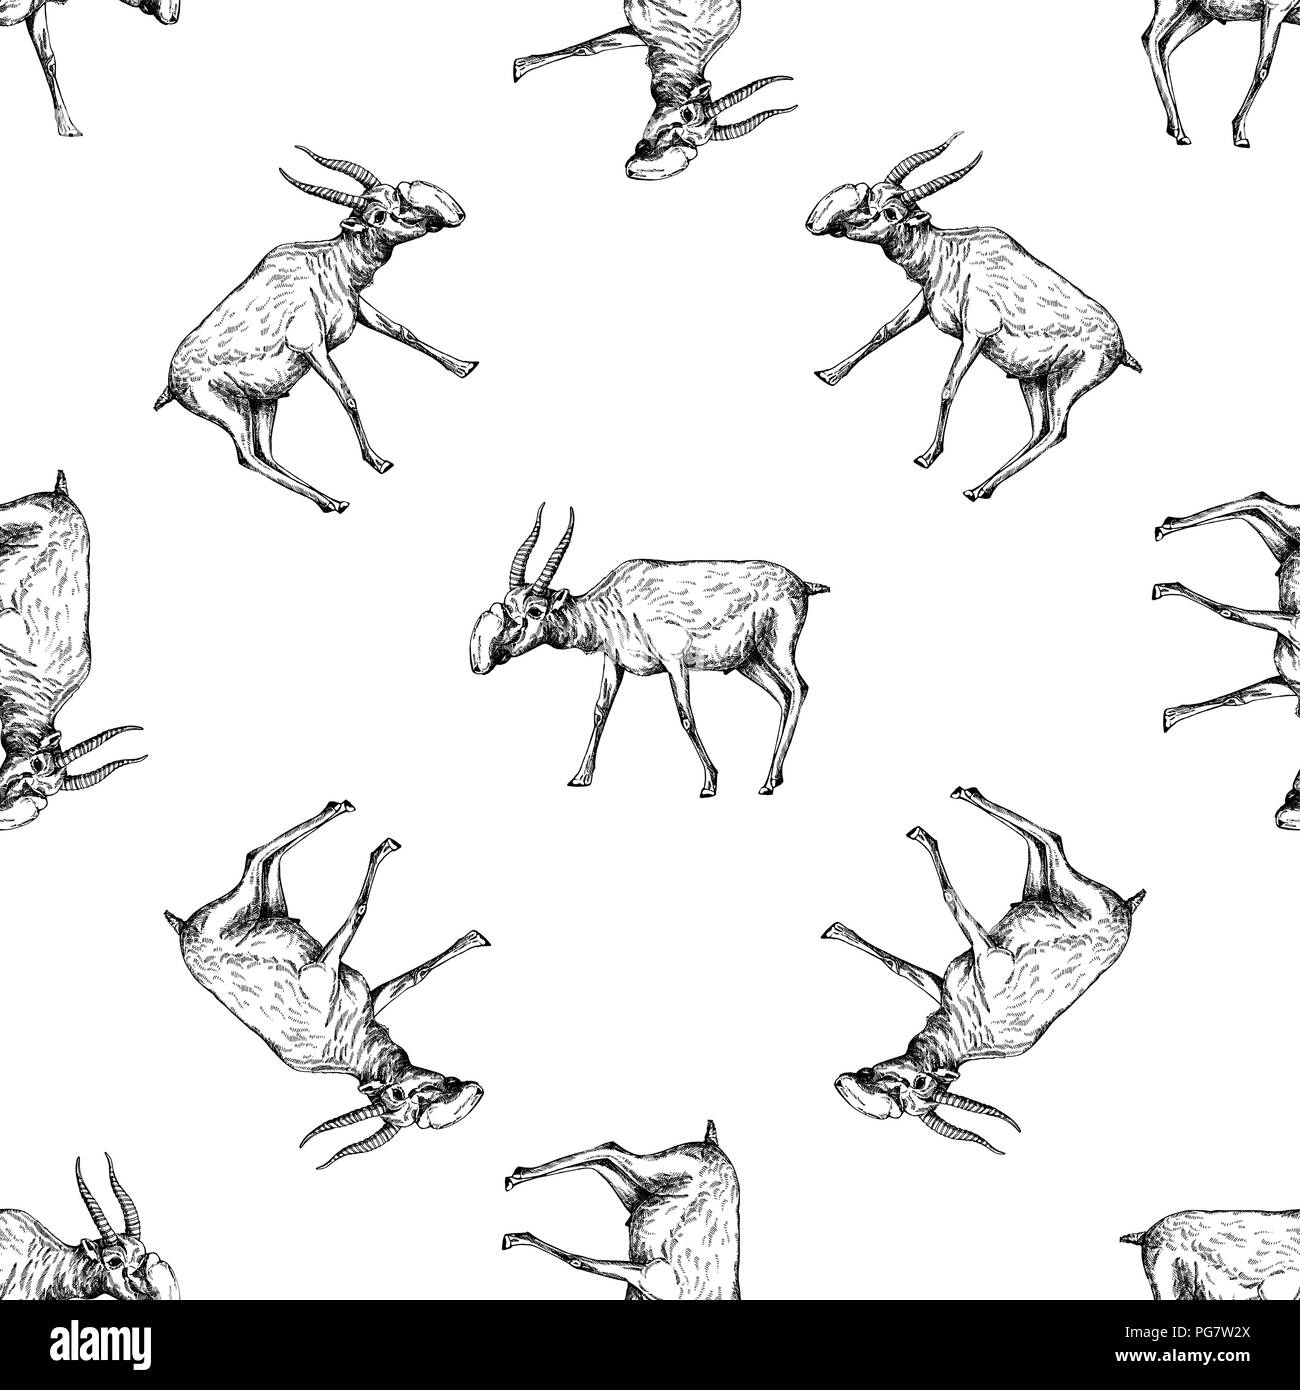 Seamless pattern of hand drawn sketch style saiga antelopes isolated on ...